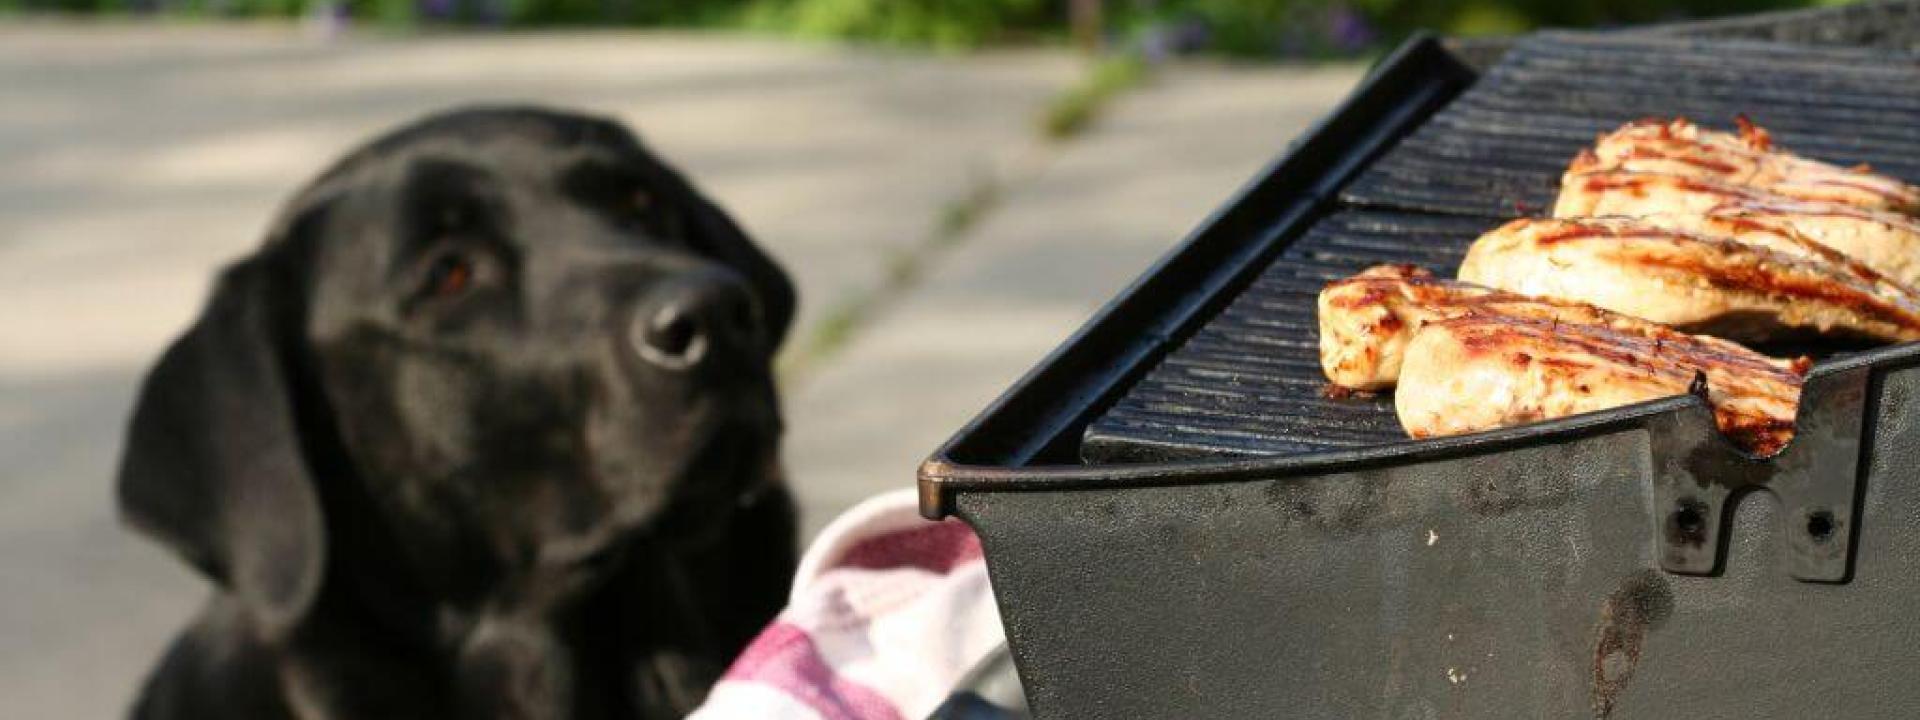 A dog sitting near a grill with meat on it.